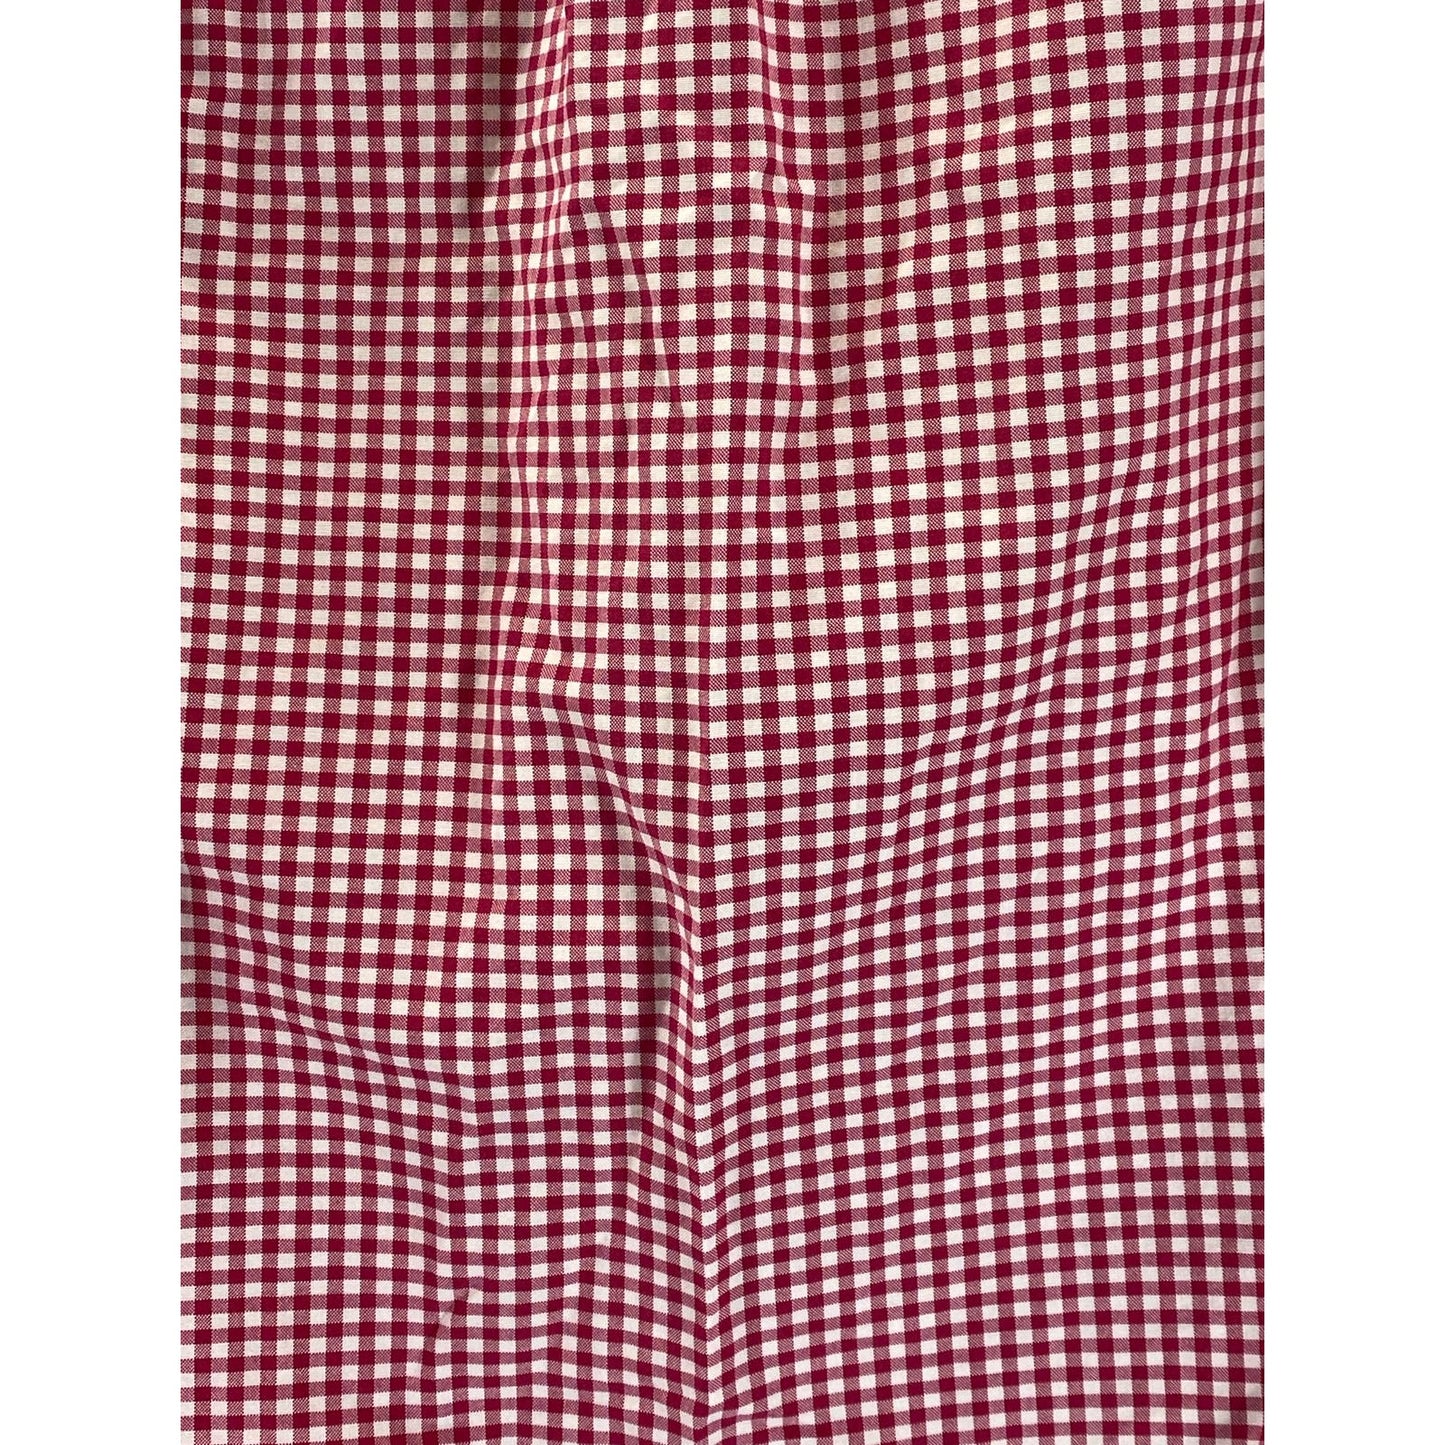 AUTHENTIC J.CREW Men's Red/White Gingham Oxford Slim-Fit Button-Up Shirt SZ M